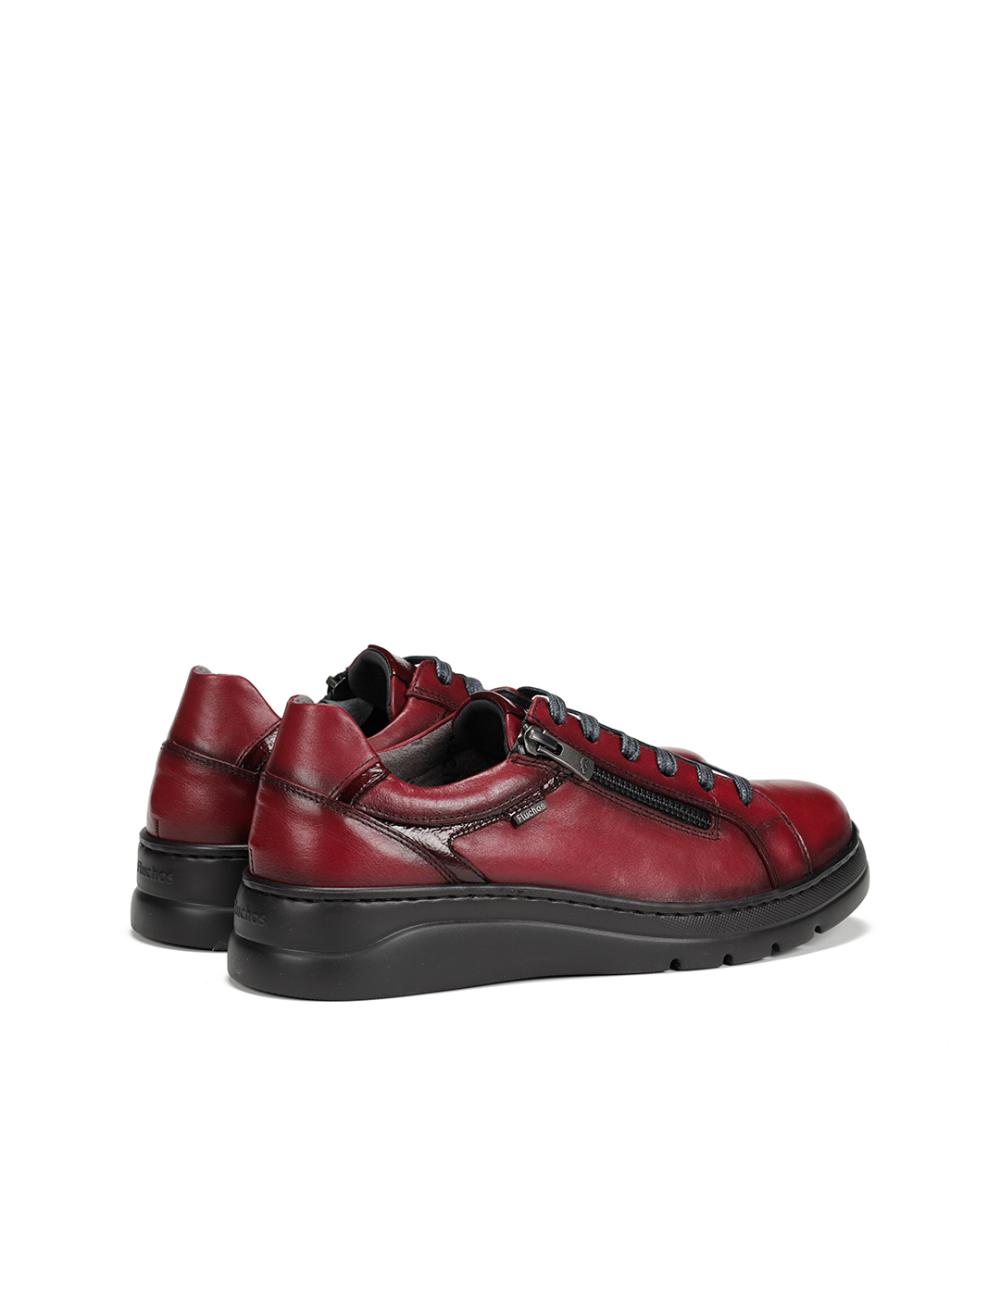 ZAPATILLAS CASUAL CUÑA MUJER PEPE JEANS BLUR POINT PLS31510